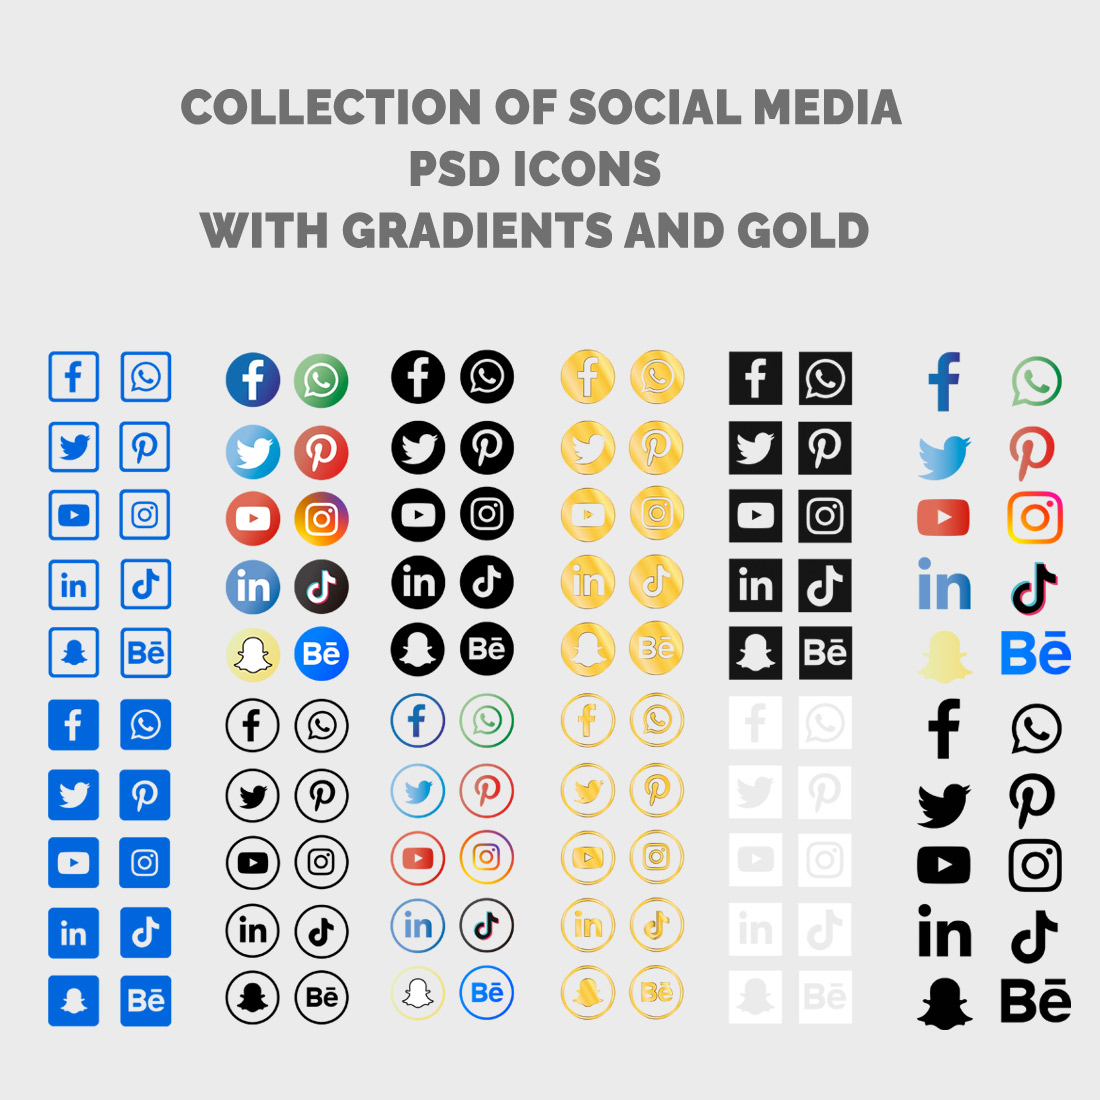 Collection of social media psd icons with gradients and gold cover image.